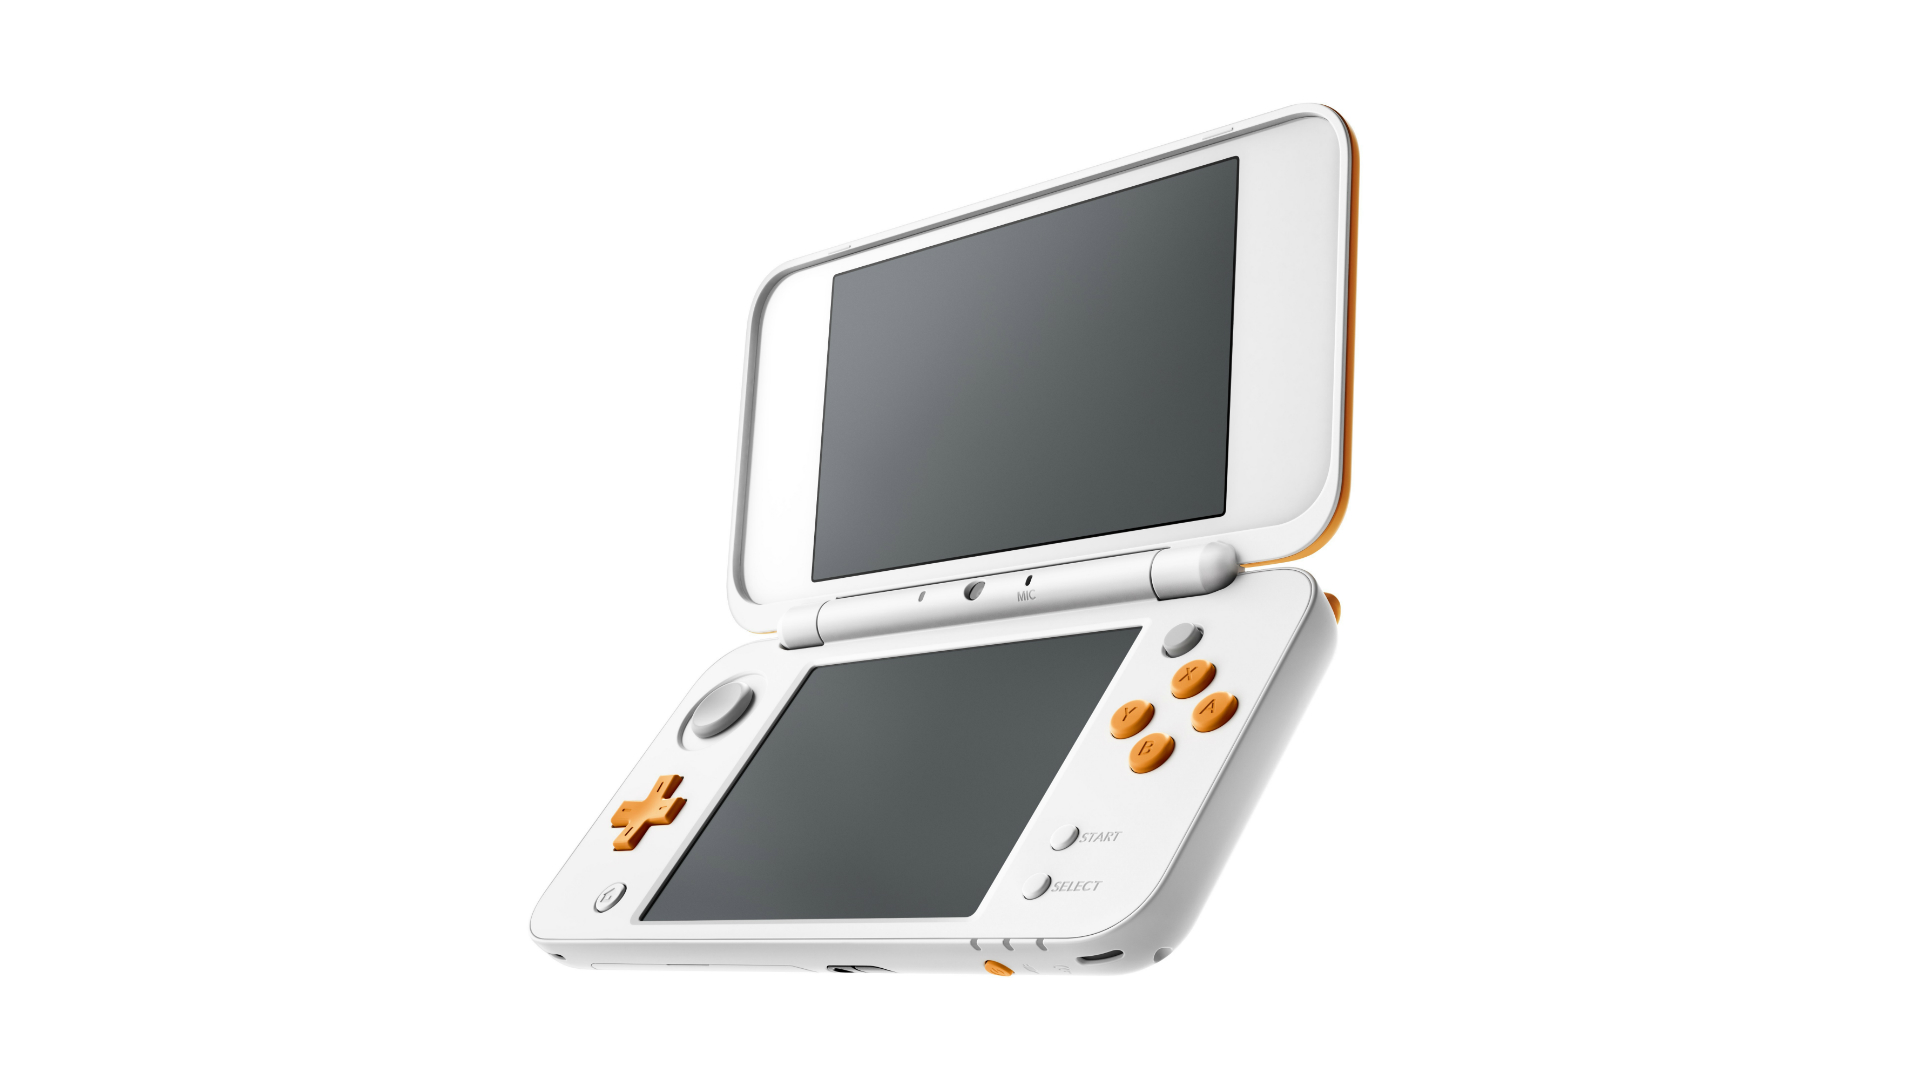 New Nintendo 2DS XL in white and orange - one of the best handheld consoles